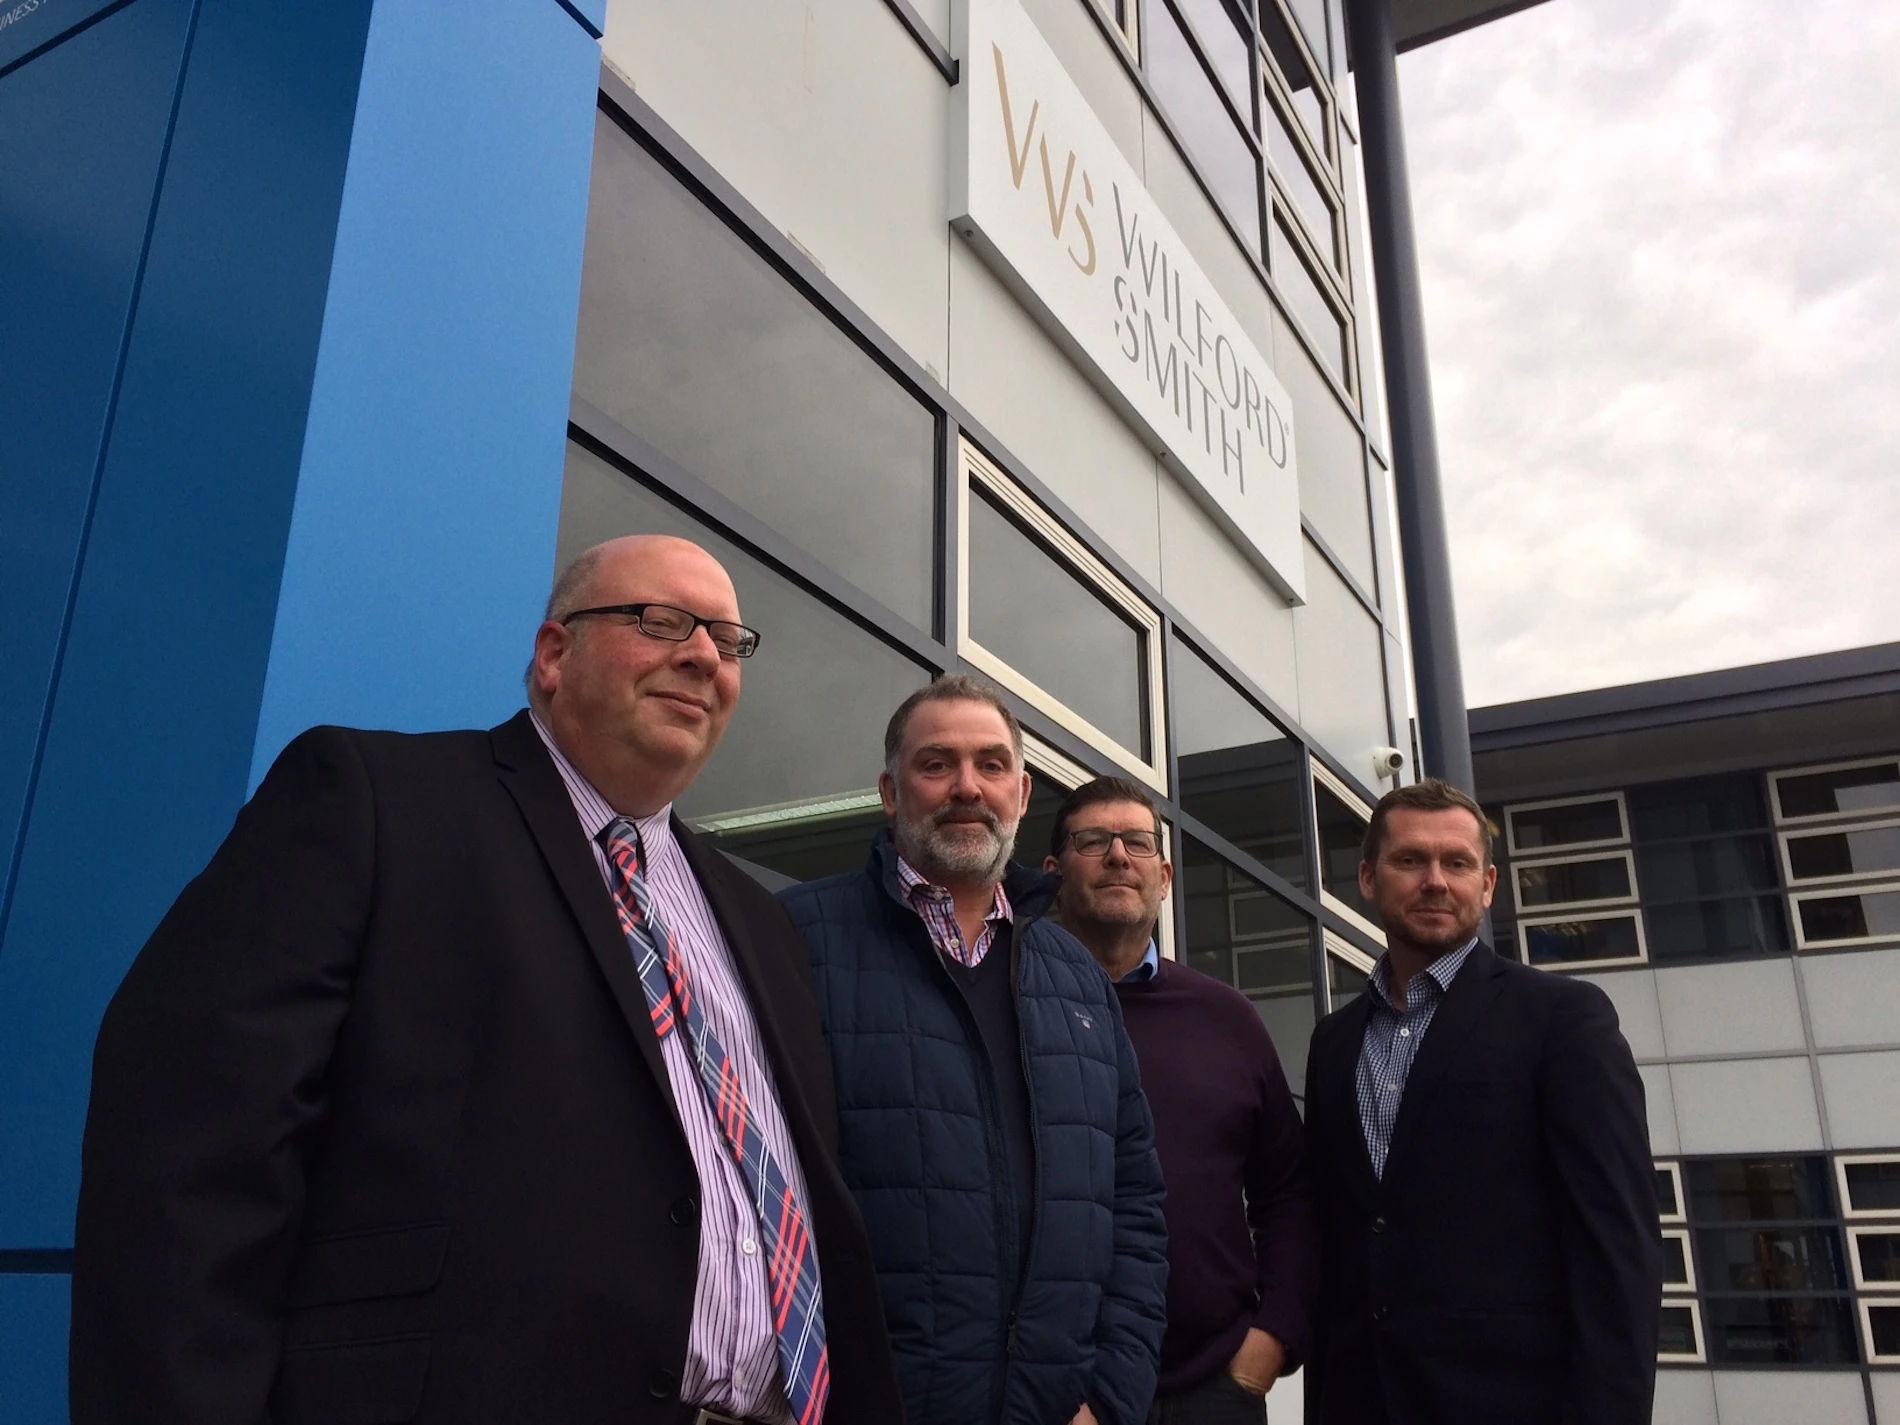  Garth Imison from Wilford Smith with Andrew Allen, Robert Eaton and Richard Burns from ARBA Group at Meadowhall Business Park.